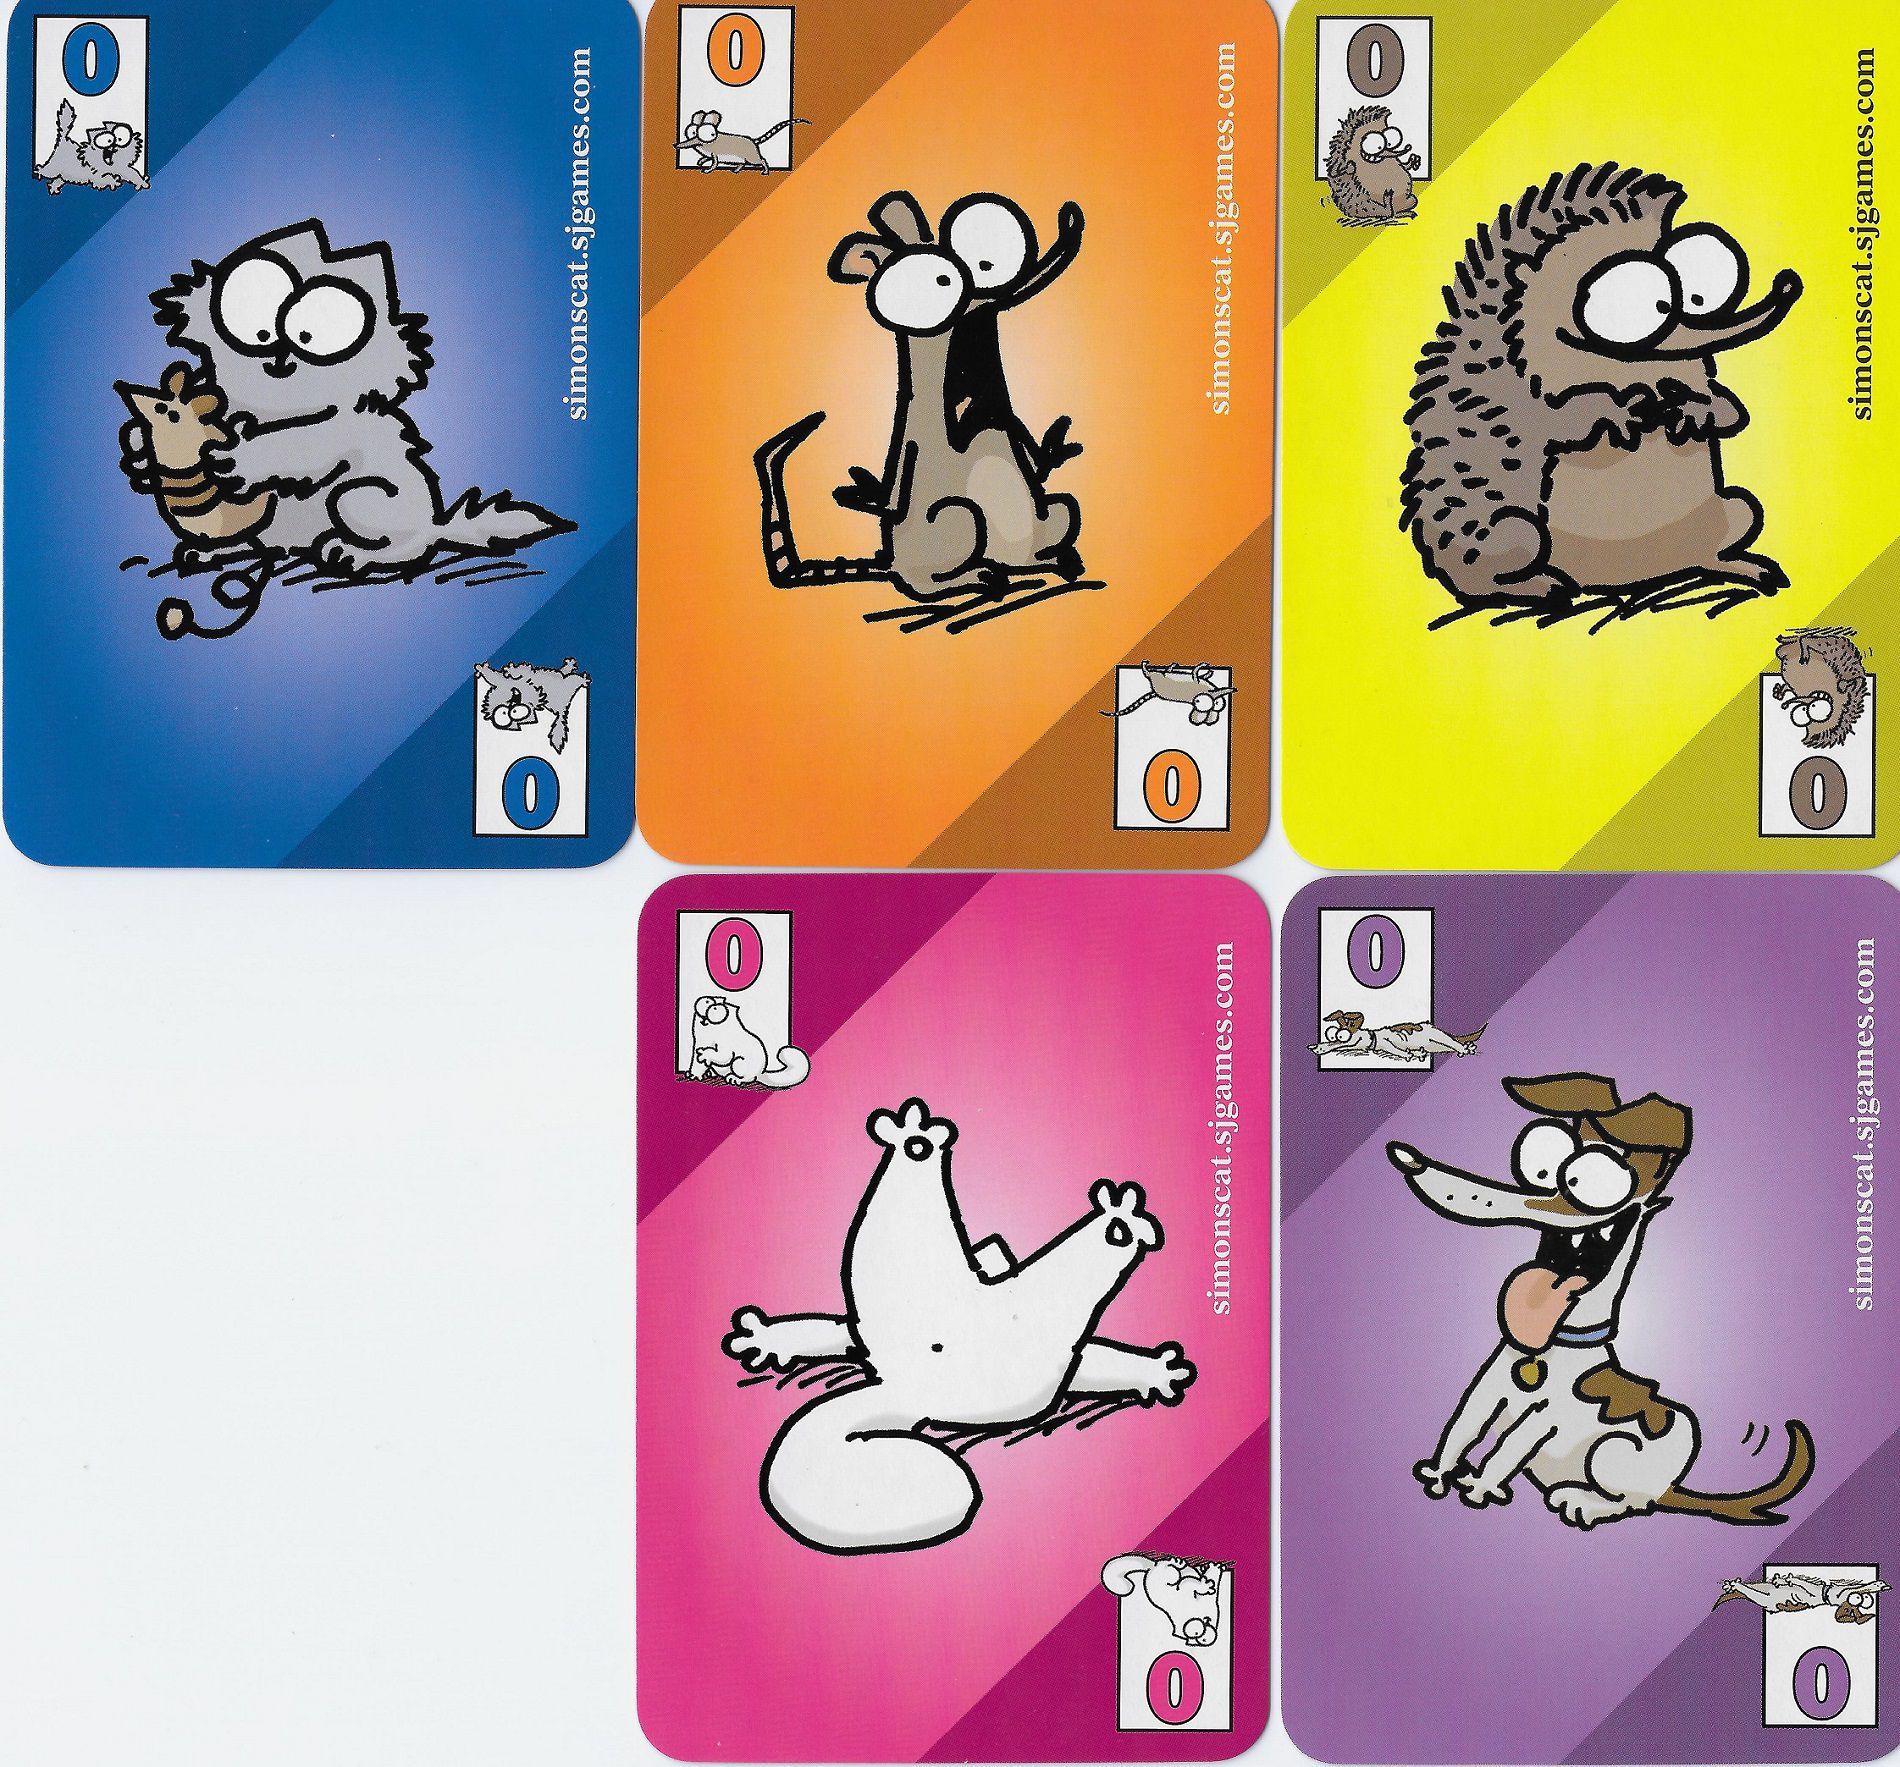 Simon's Cat Card Game: Promotional "0" Cards